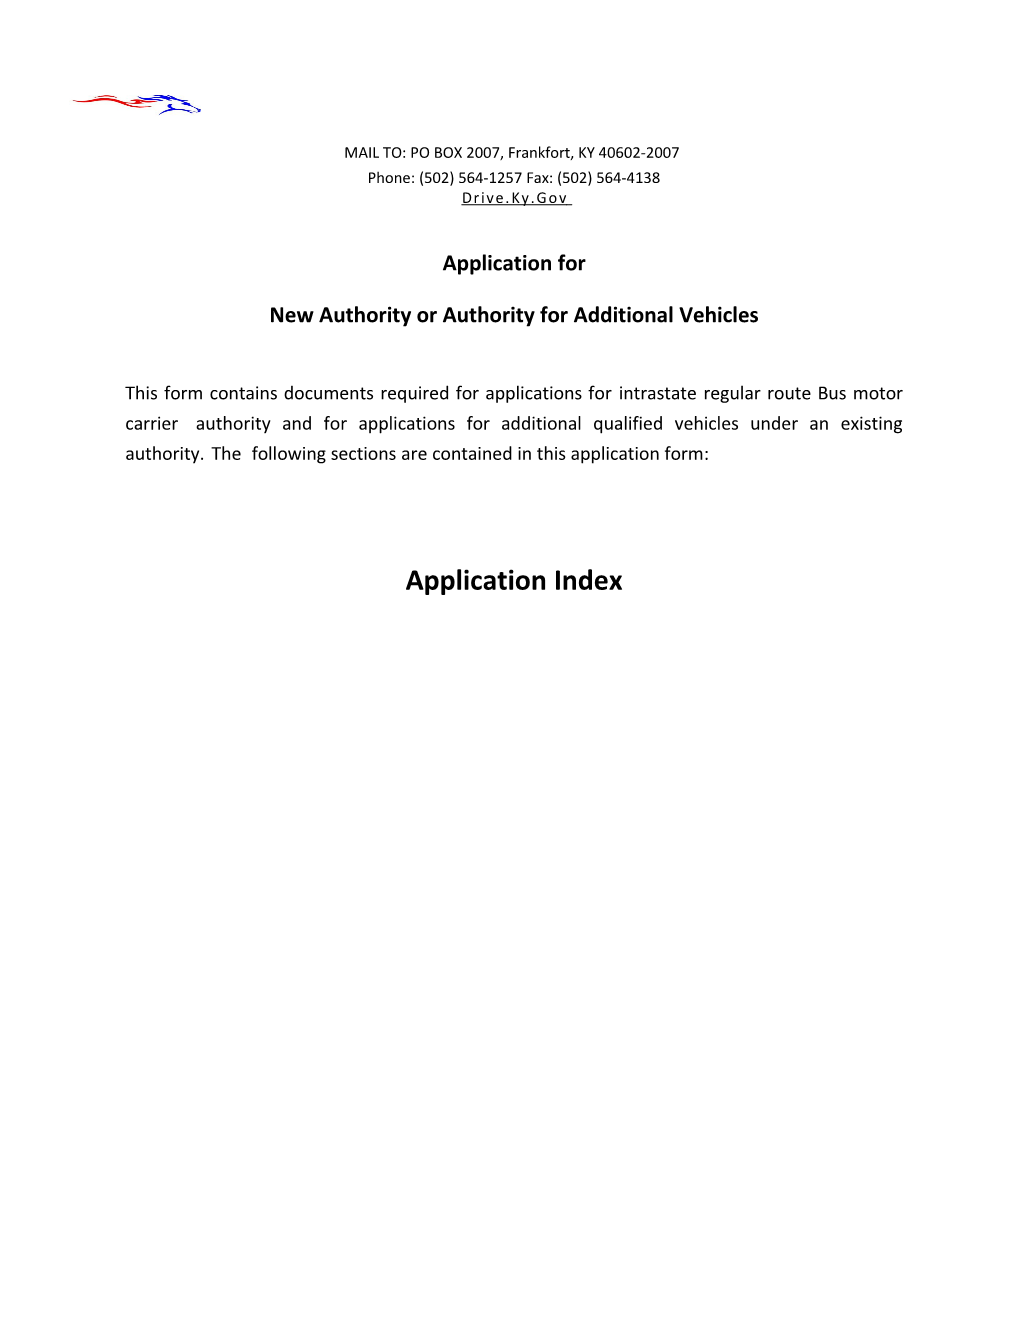 Bus Authority Application